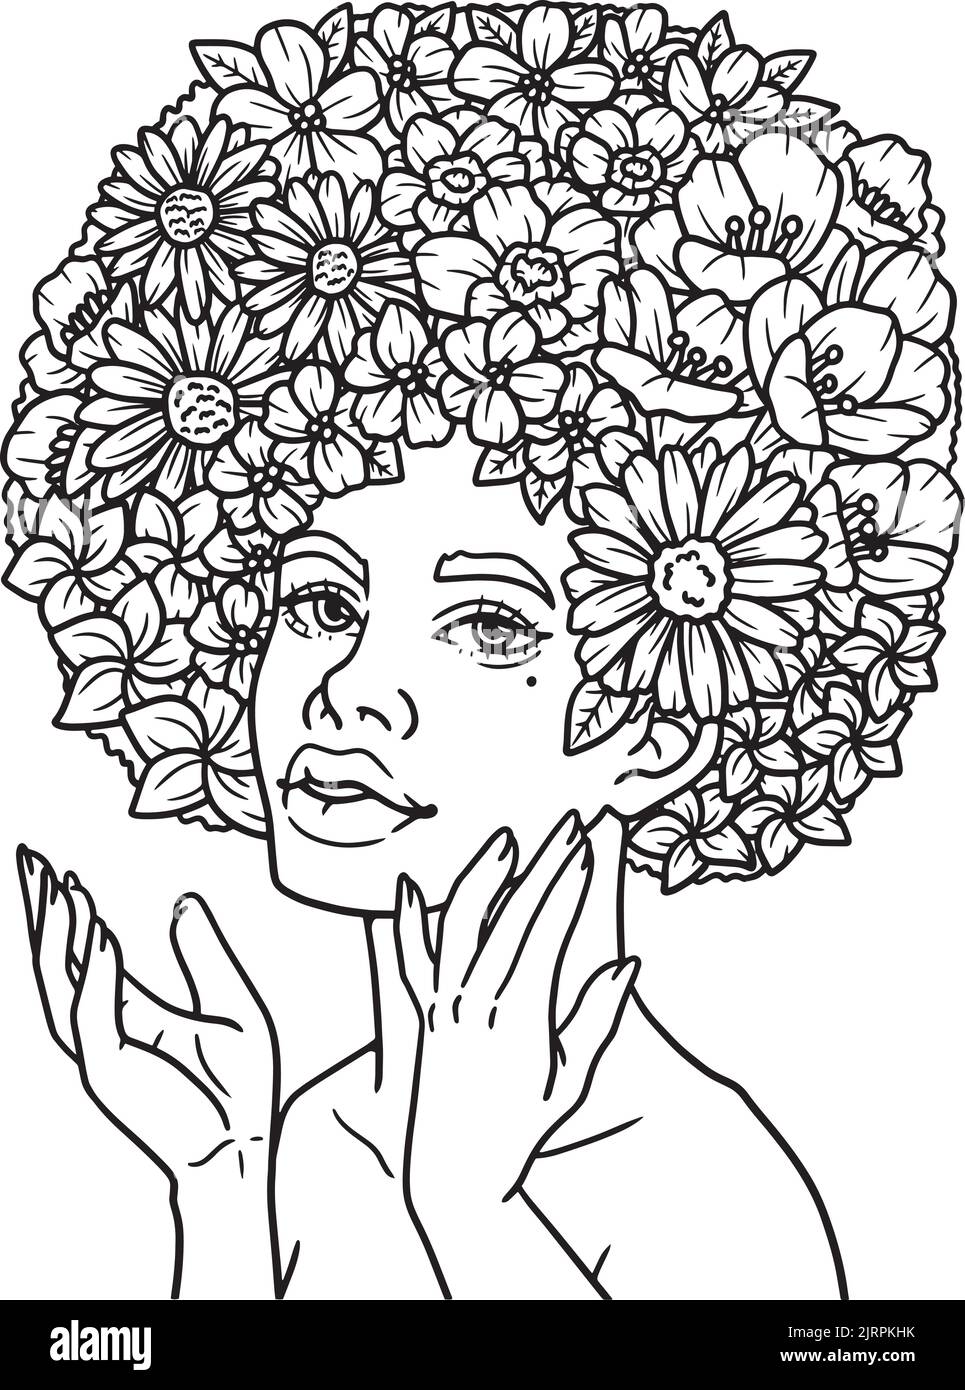 Beautiful Afro American Flower Girl Coloring Page Stock Vector